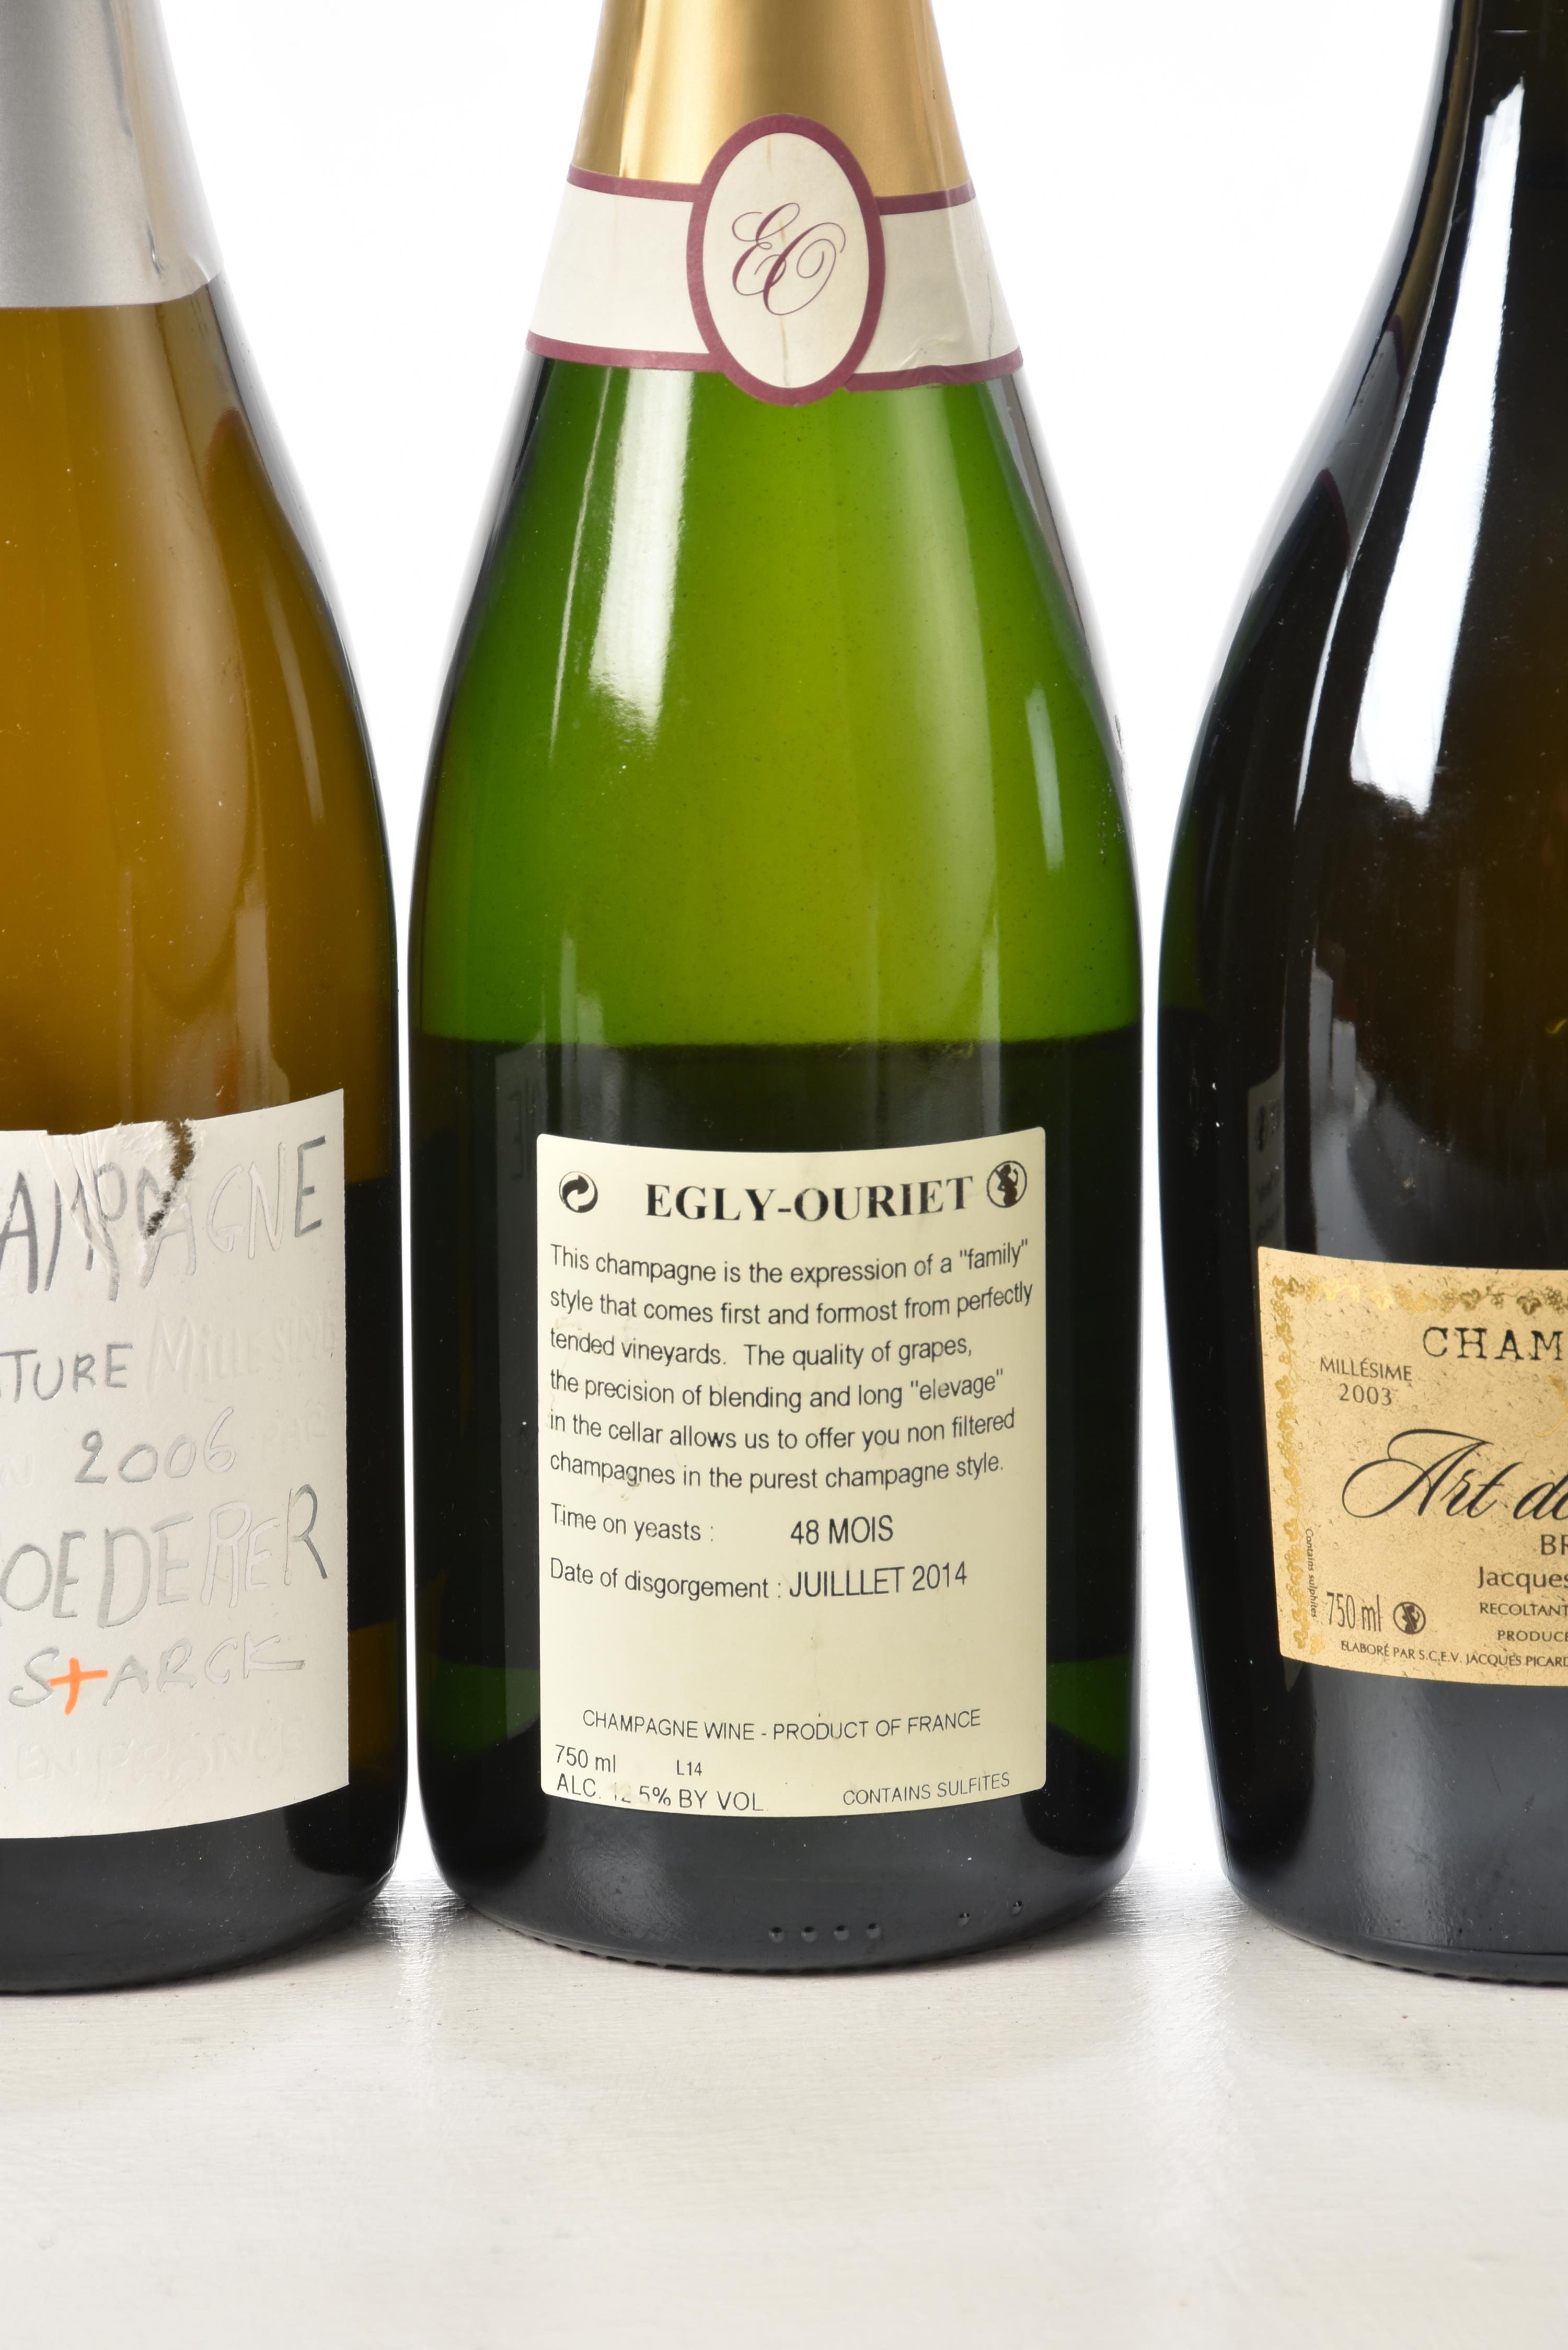 Champagne Egly Ouriet Brut Tradition GC Disgorged July 2014 1 bt Champagne Louis Roederer Brut Natur - Image 2 of 2